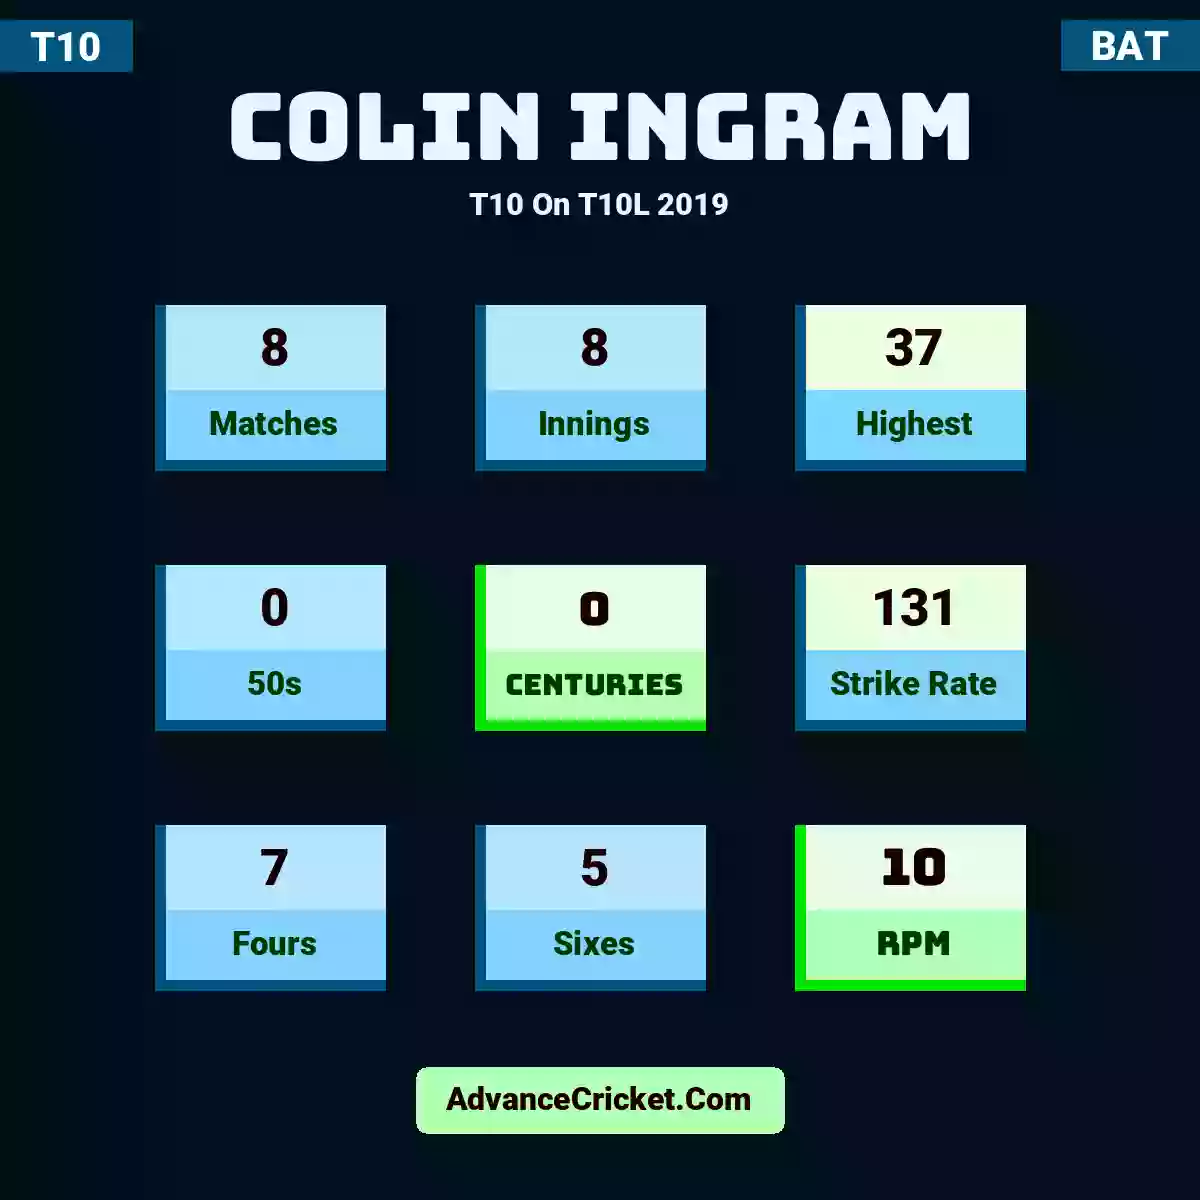 Colin Ingram T10  On T10L 2019, Colin Ingram played 8 matches, scored 37 runs as highest, 0 half-centuries, and 0 centuries, with a strike rate of 131. C.Ingram hit 7 fours and 5 sixes, with an RPM of 10.